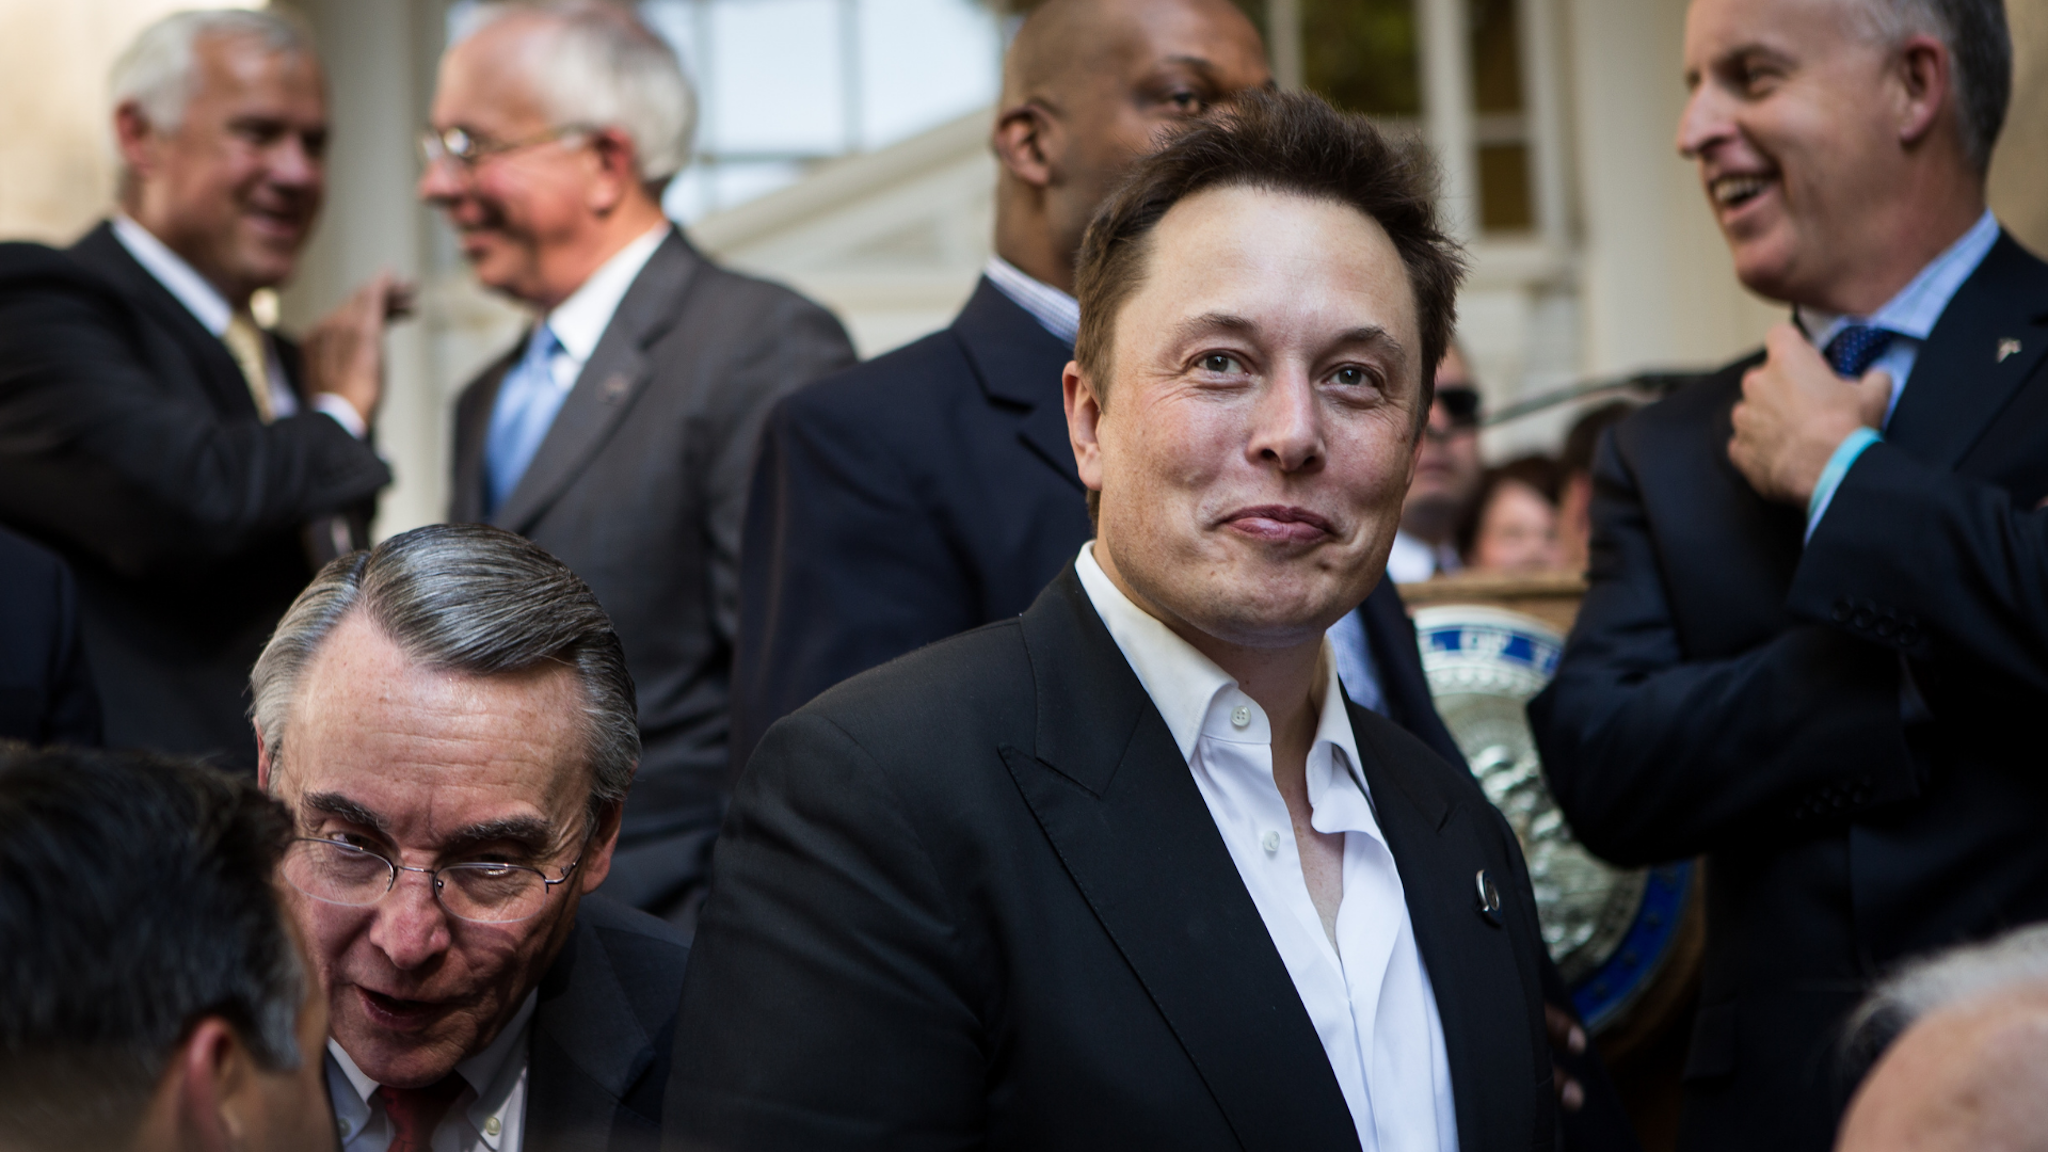 CARSON CITY, NEVADA- SEPTEMBER 4: Elon Musk, CEO of Tesla Motors, greets the audience after speaking at a press conference at the Nevada State Capitol, September 4, 2014 in Carson City, Nevada. Musk and Sandoval announced a plan to build a Tesla Gigafactory in Nevada to produce batteries for electric vehicles providing 6,500 jobs to the state.